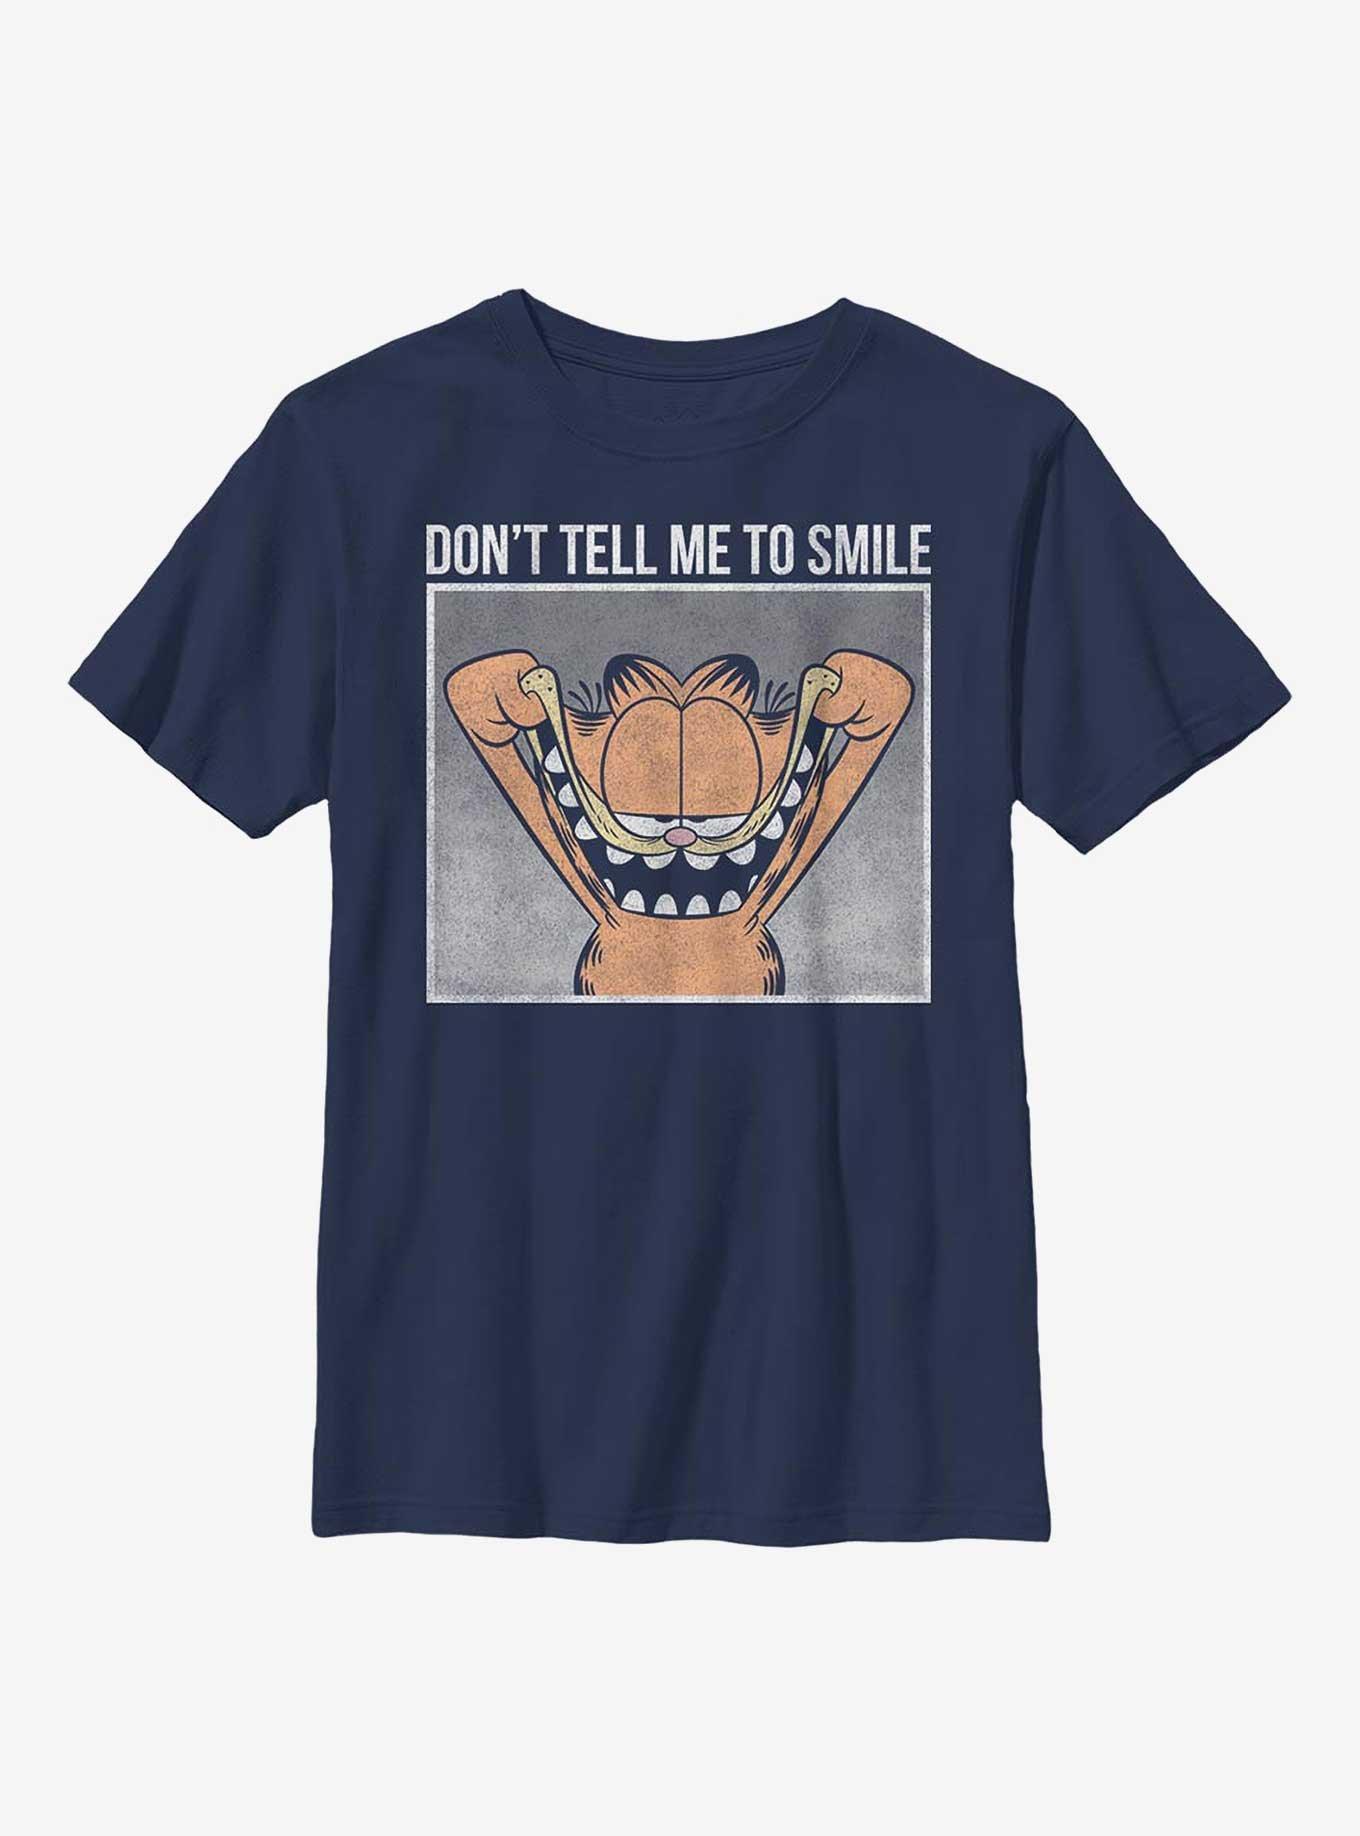 Garfield Don't Tell Me To Smile Youth T-Shirt, NAVY, hi-res